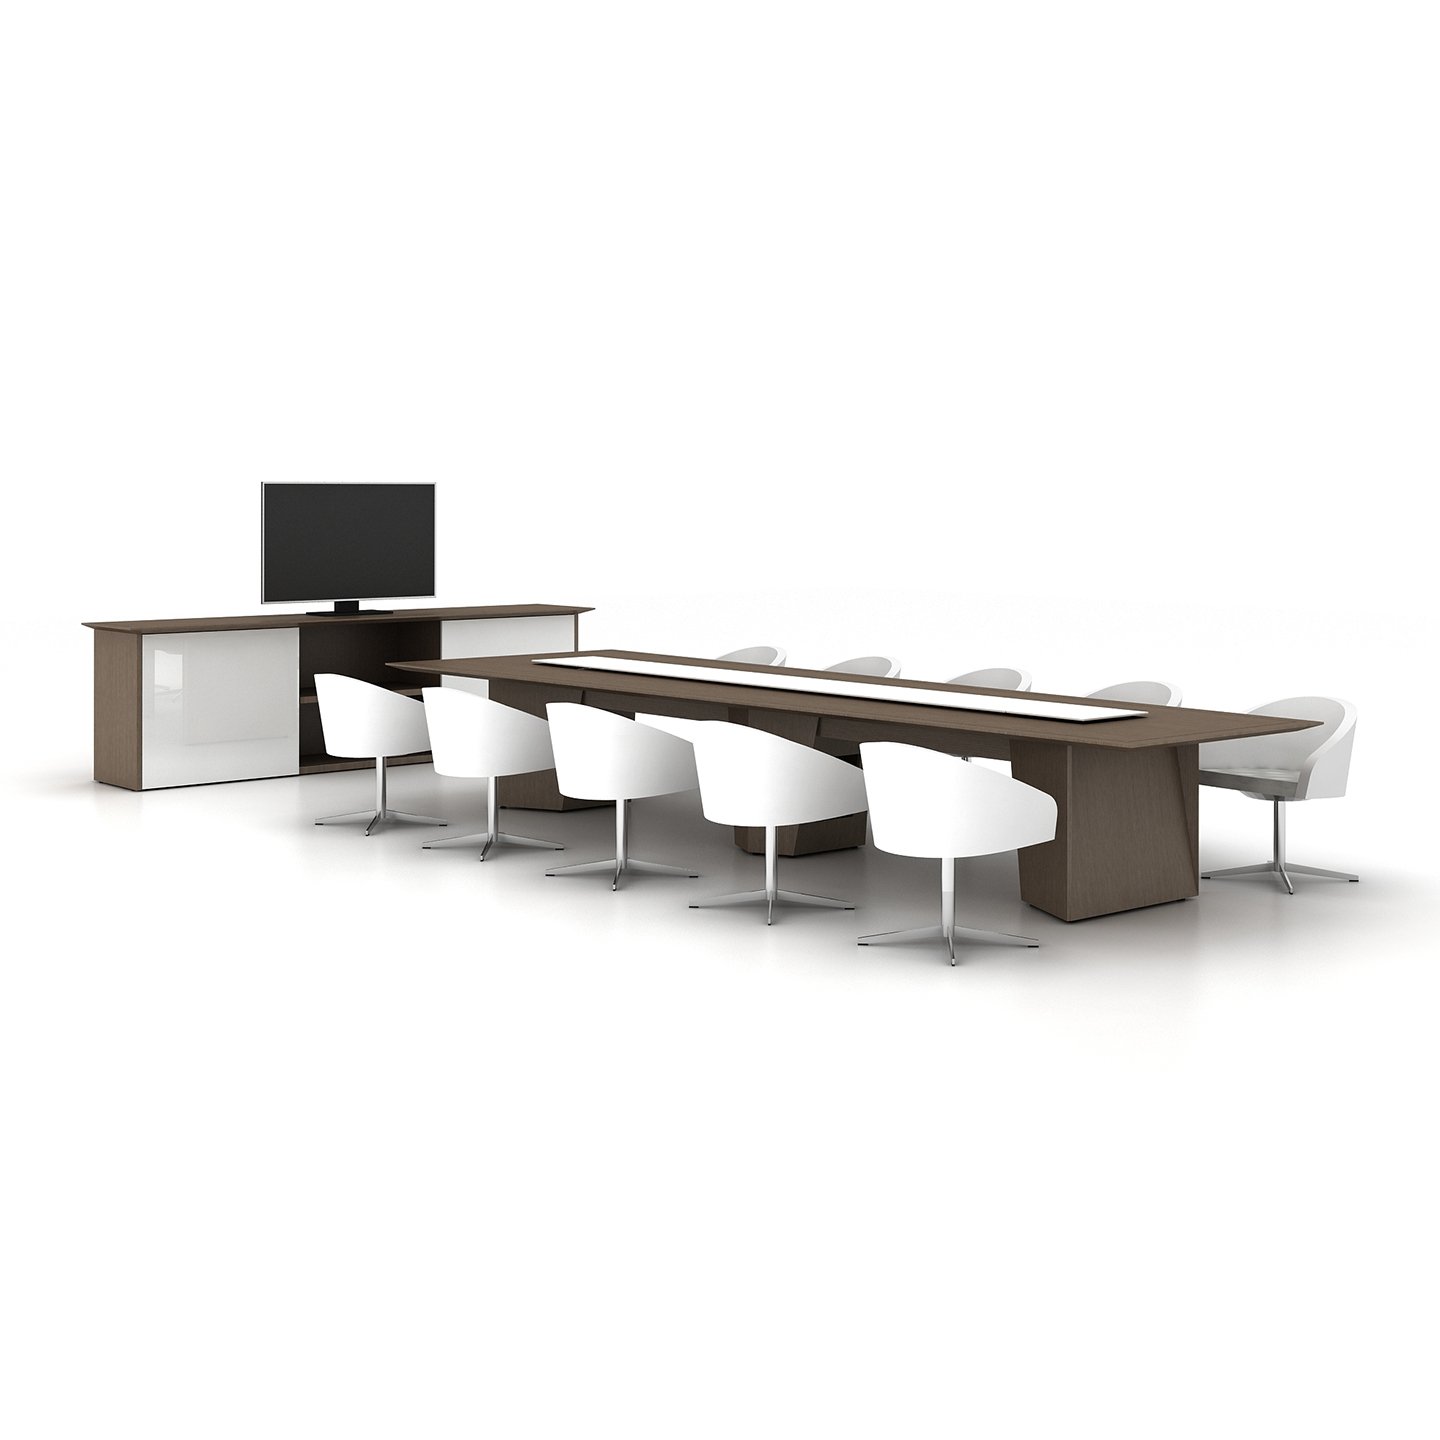 Haworth Wood Conference table in conference room mock up